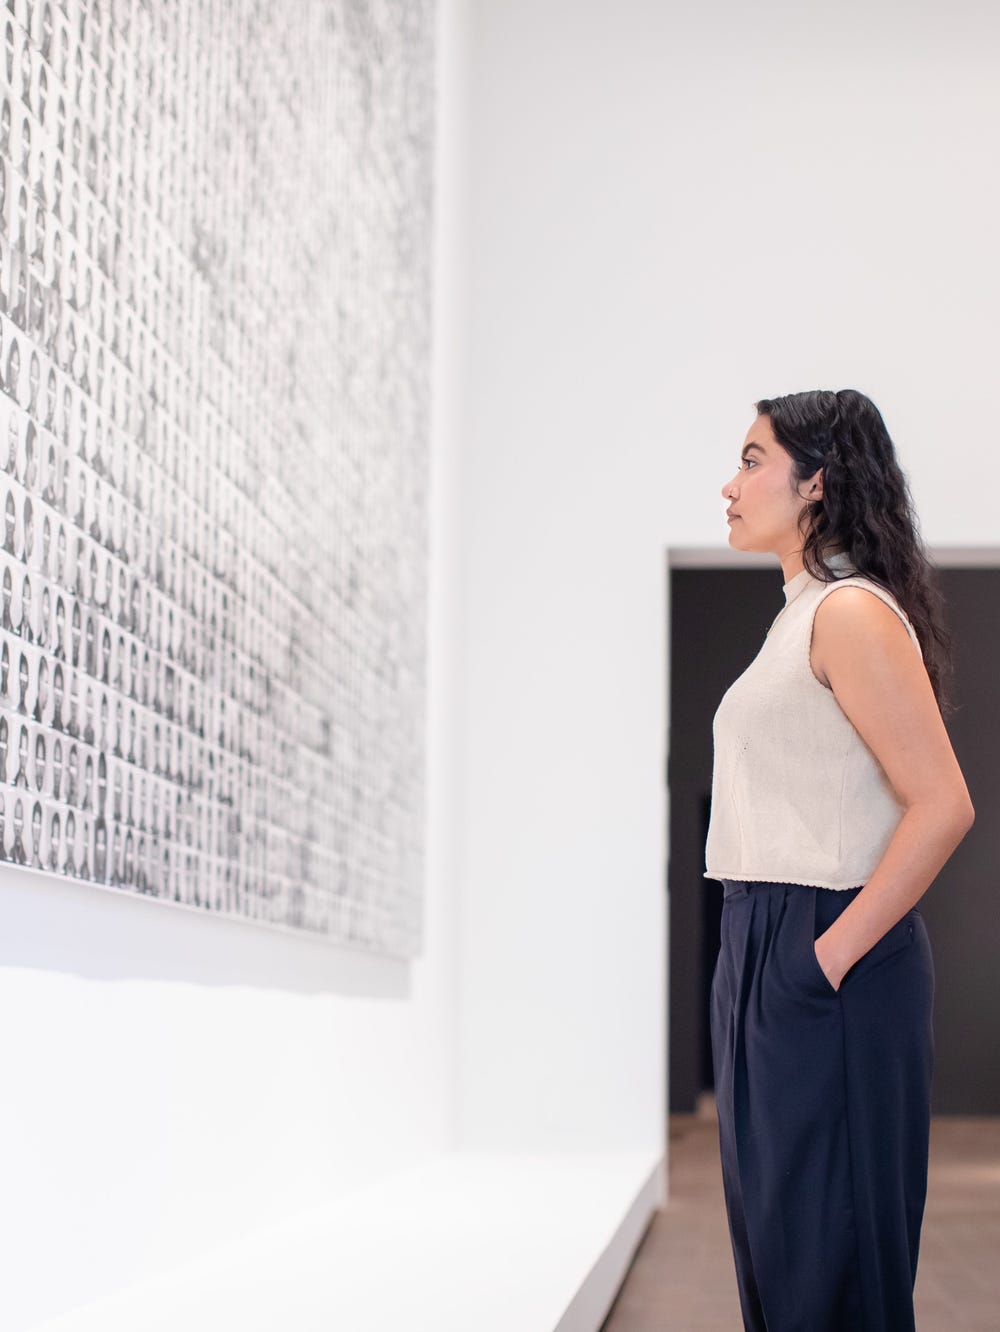 a woman looking at an artwork consisting of black and white headshots with eyes blocked out